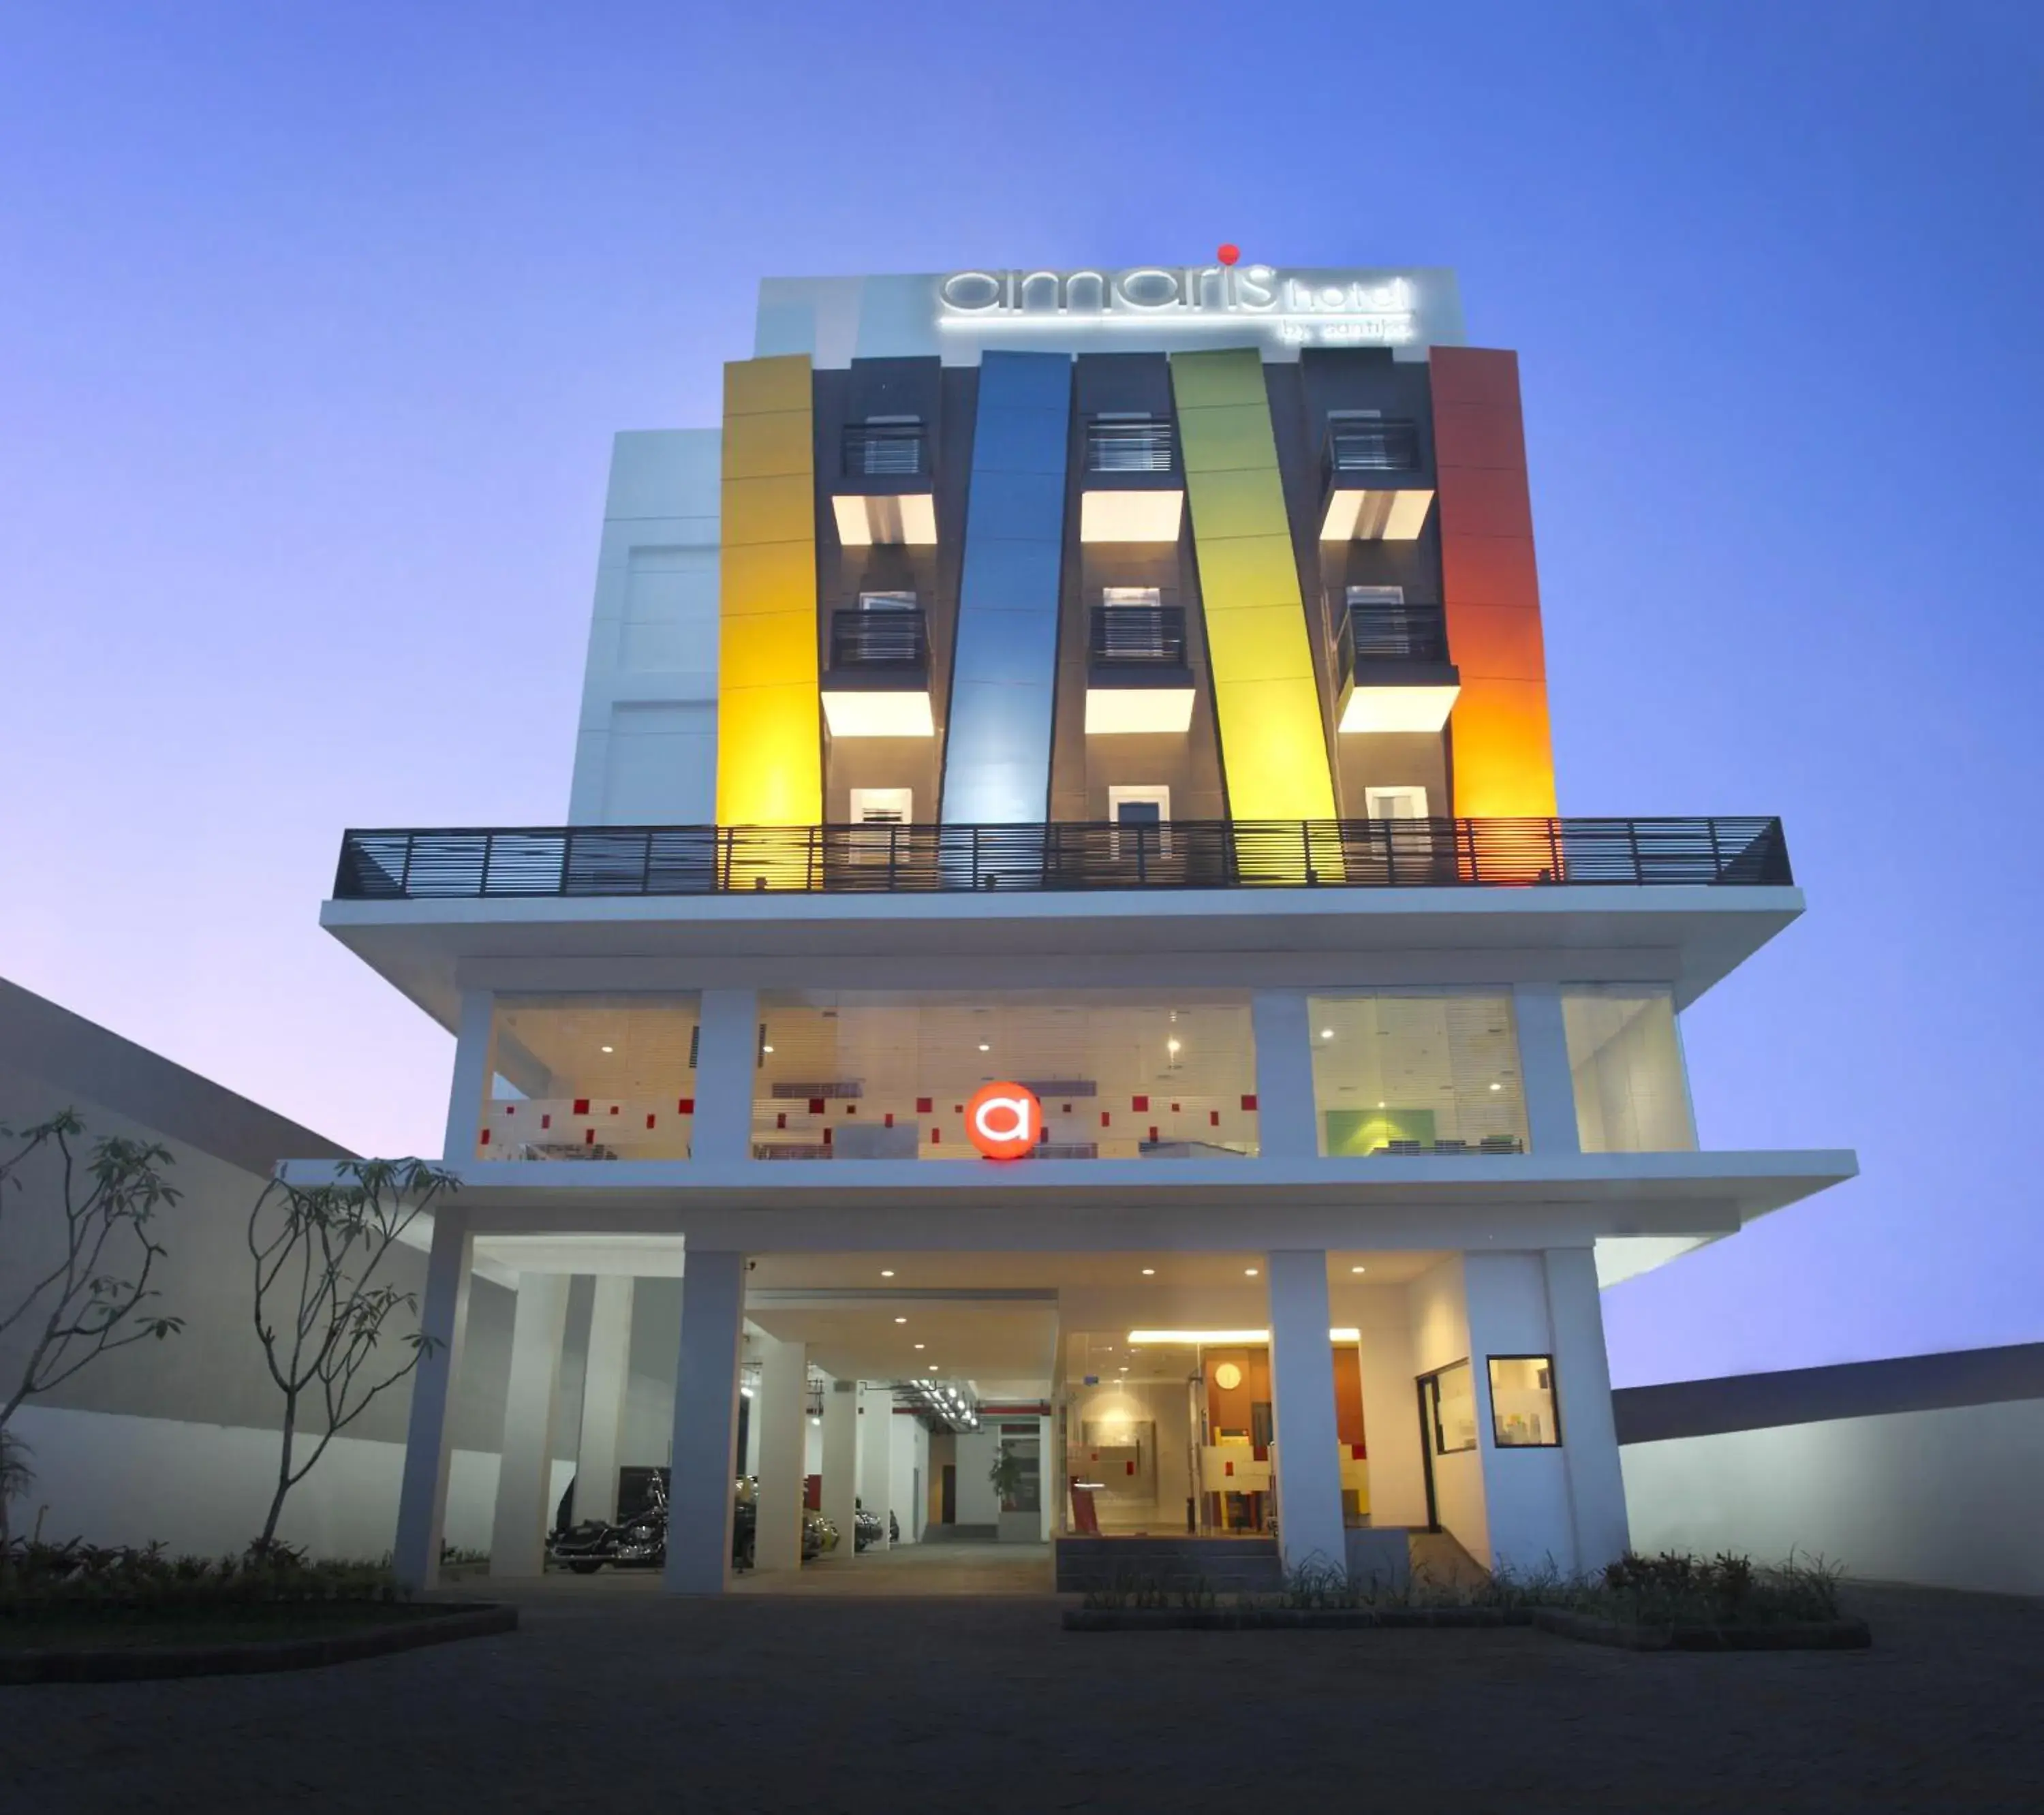 Property Building in Amaris Hotel Malang